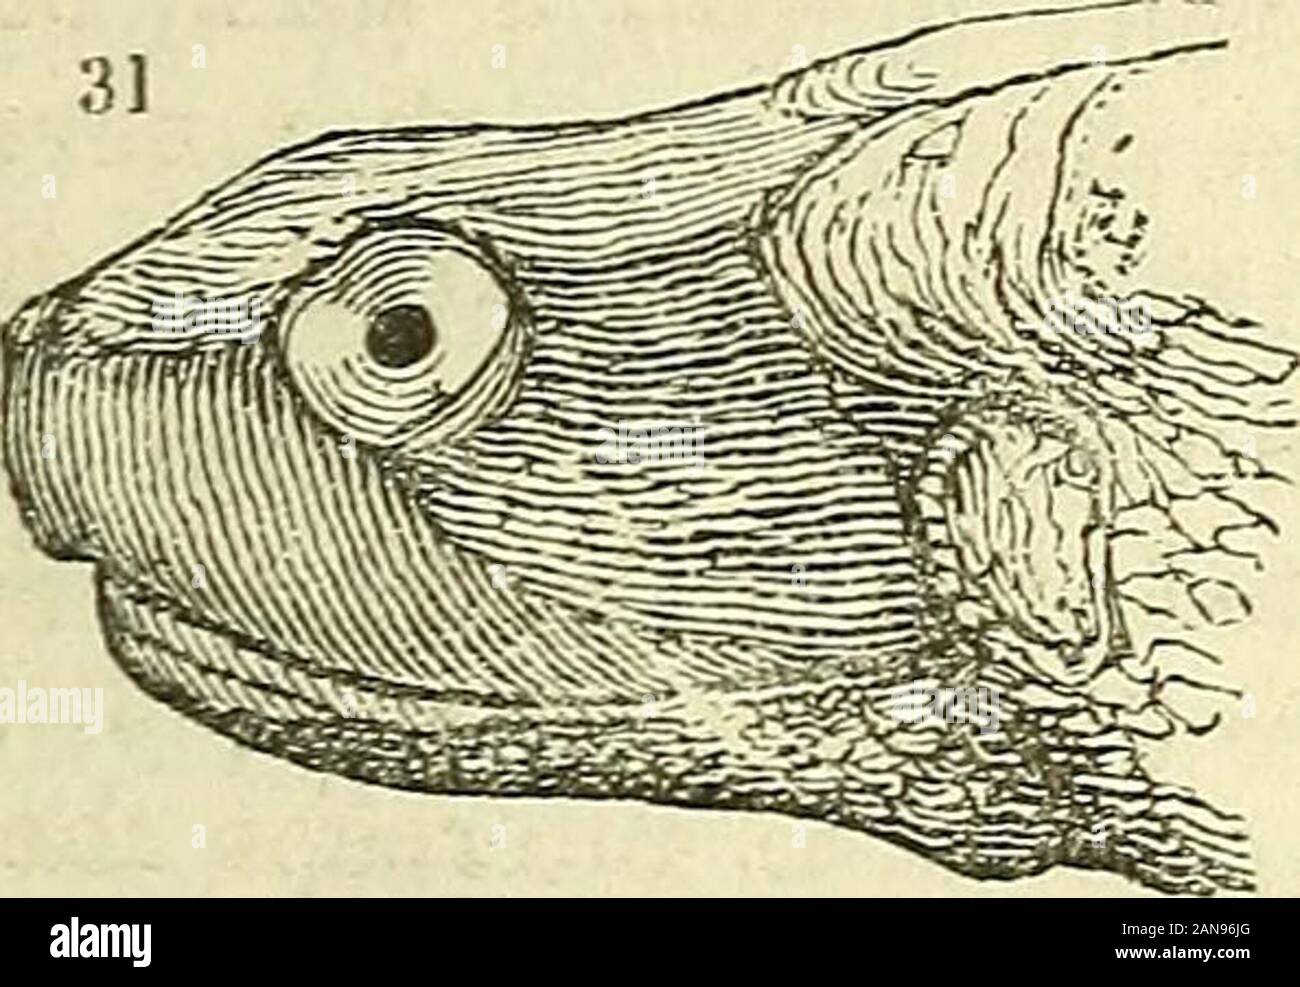 The natural history of fishes, amphibians, & reptiles, or monocardian animals . r bite.This, in short, is their only means of offence, while theyare protected from all enemies but man by the hardnessand compactness of the shell, into which they withdrawon the approach of danger. The food of these curiousreptiles is as various as their forms and habits. We shalltherefore shortly enumerate the principal divisions ofthe whole tribe, arranging them in the following order:—1. The TestudinidcB, or land tortoises; 2. The EmydcB, or freshwater tortoises ; 3.The ChelydridcB, or crocodiletortoises ; 4. Stock Photo